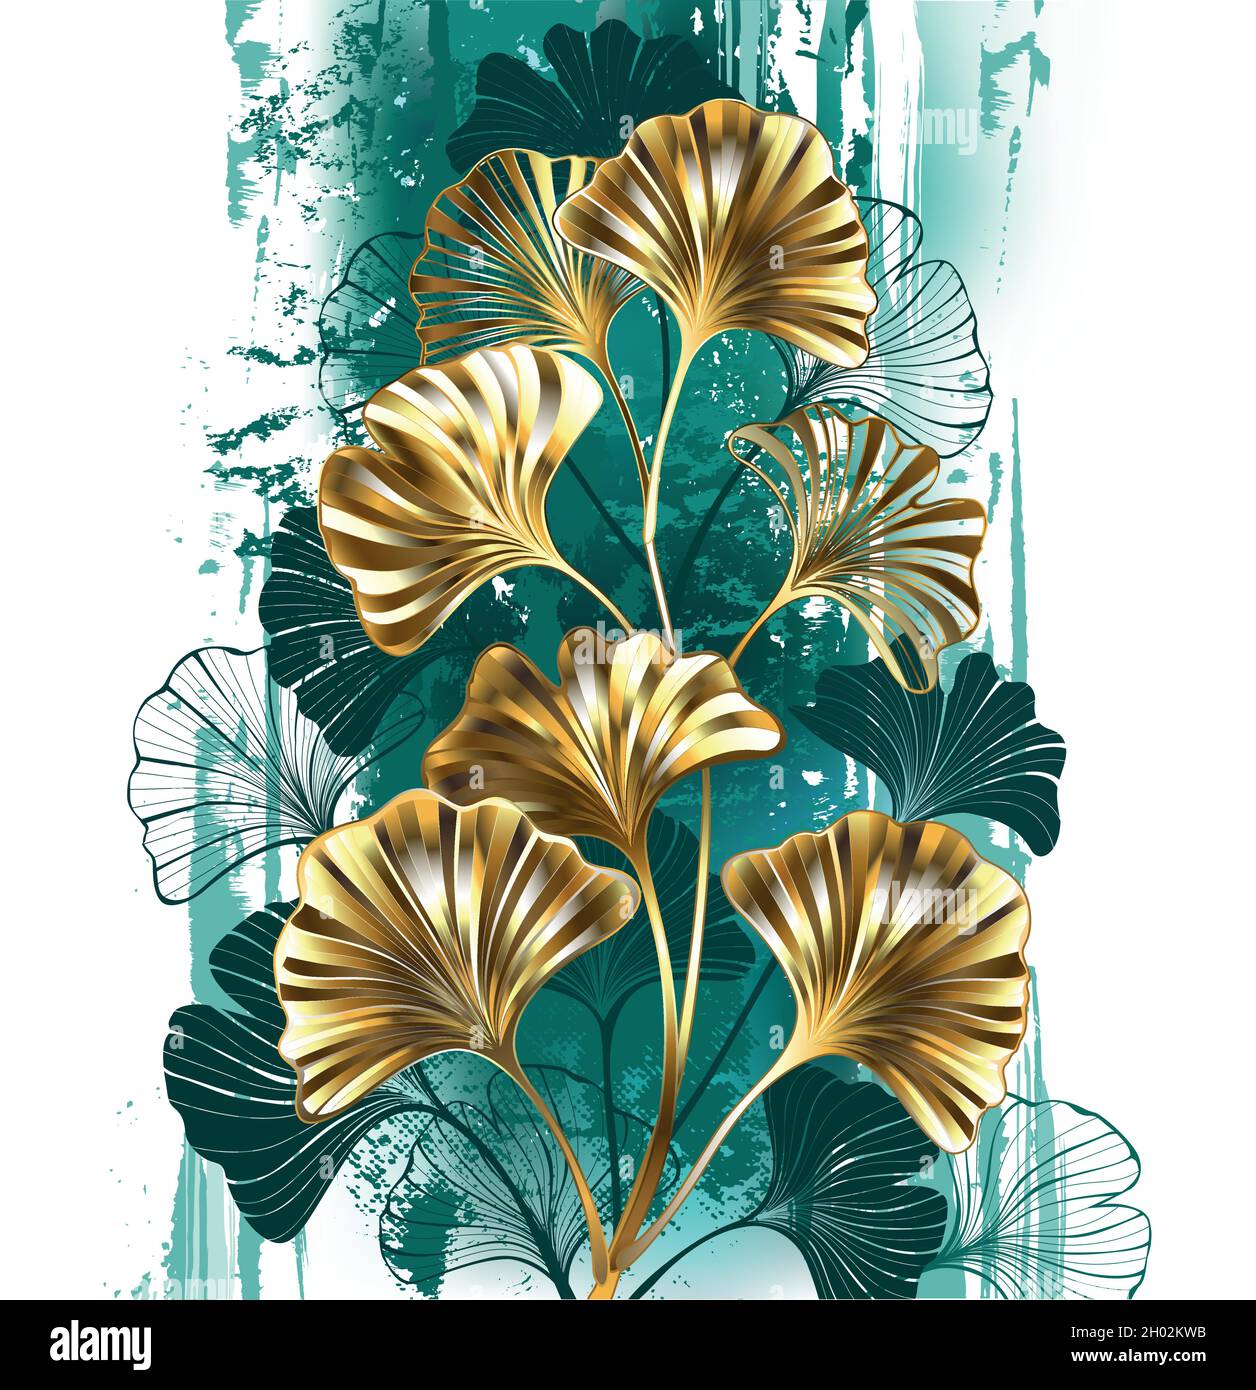 Isolated gold leaf plant vector design Stock Vector Image & Art - Alamy